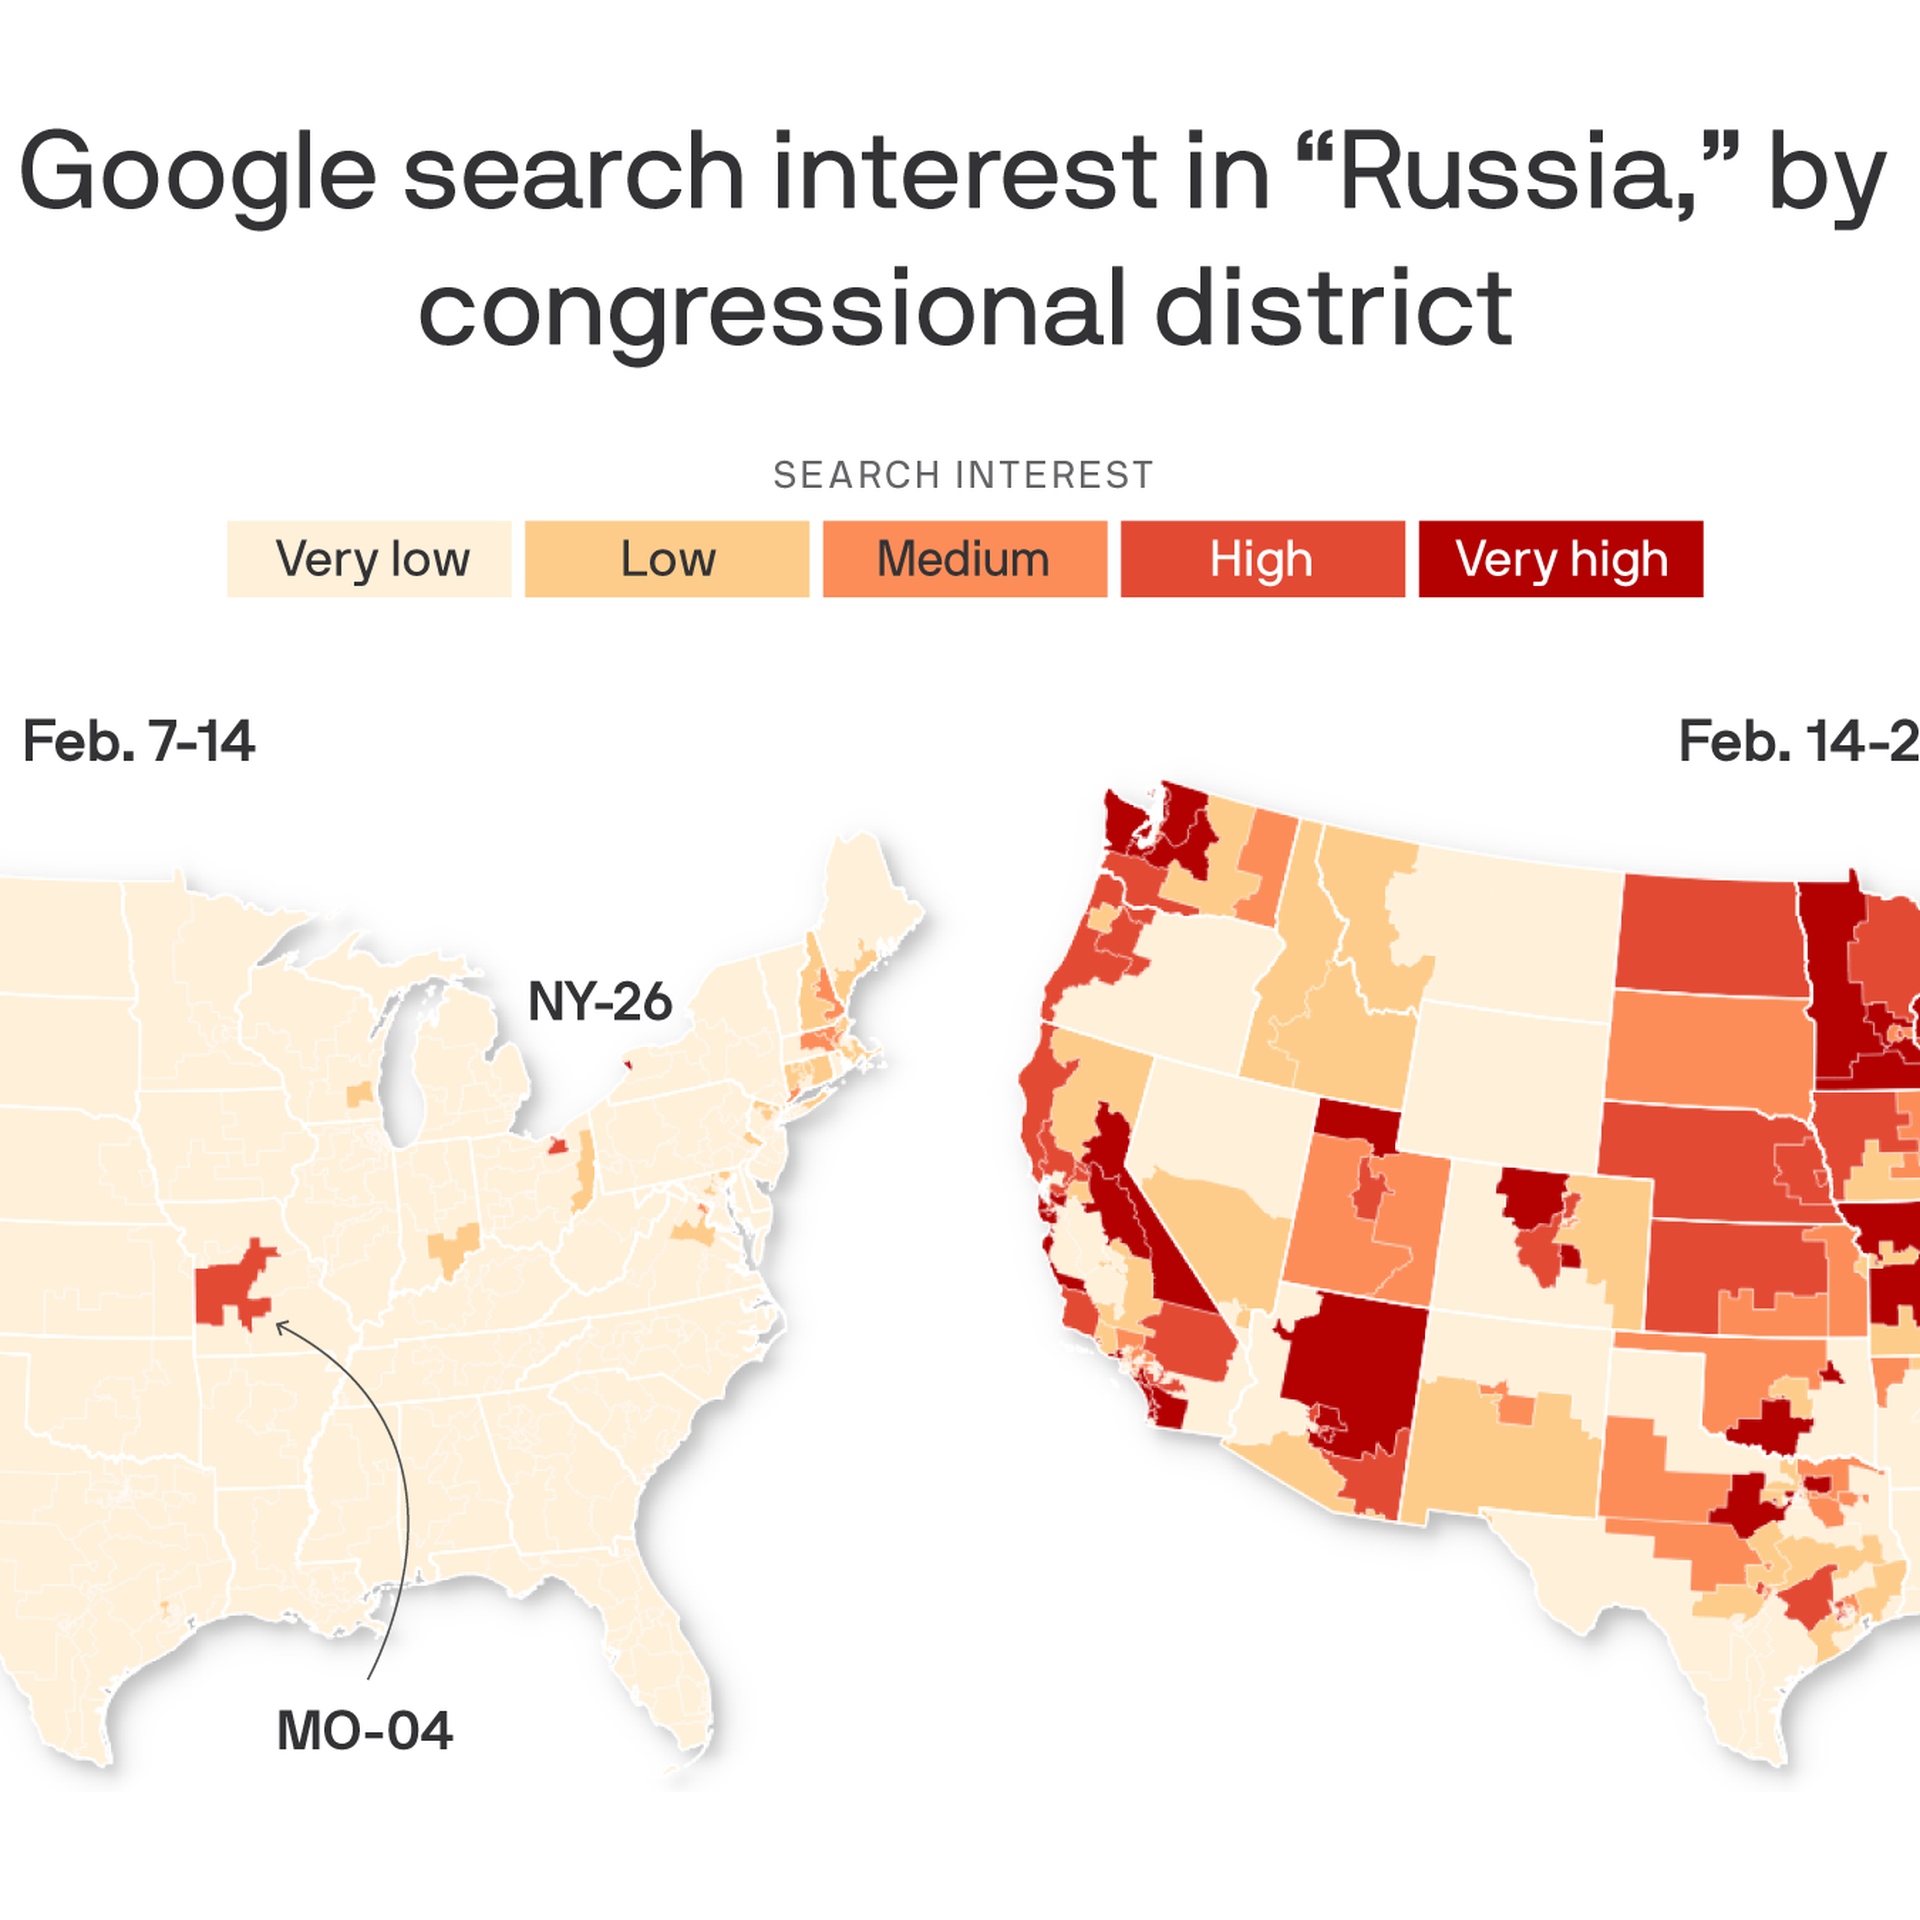 Colorado's military and academic communities are greatly interested in the Russian conflict in Ukraine, according to new Google Trends data and analysis.